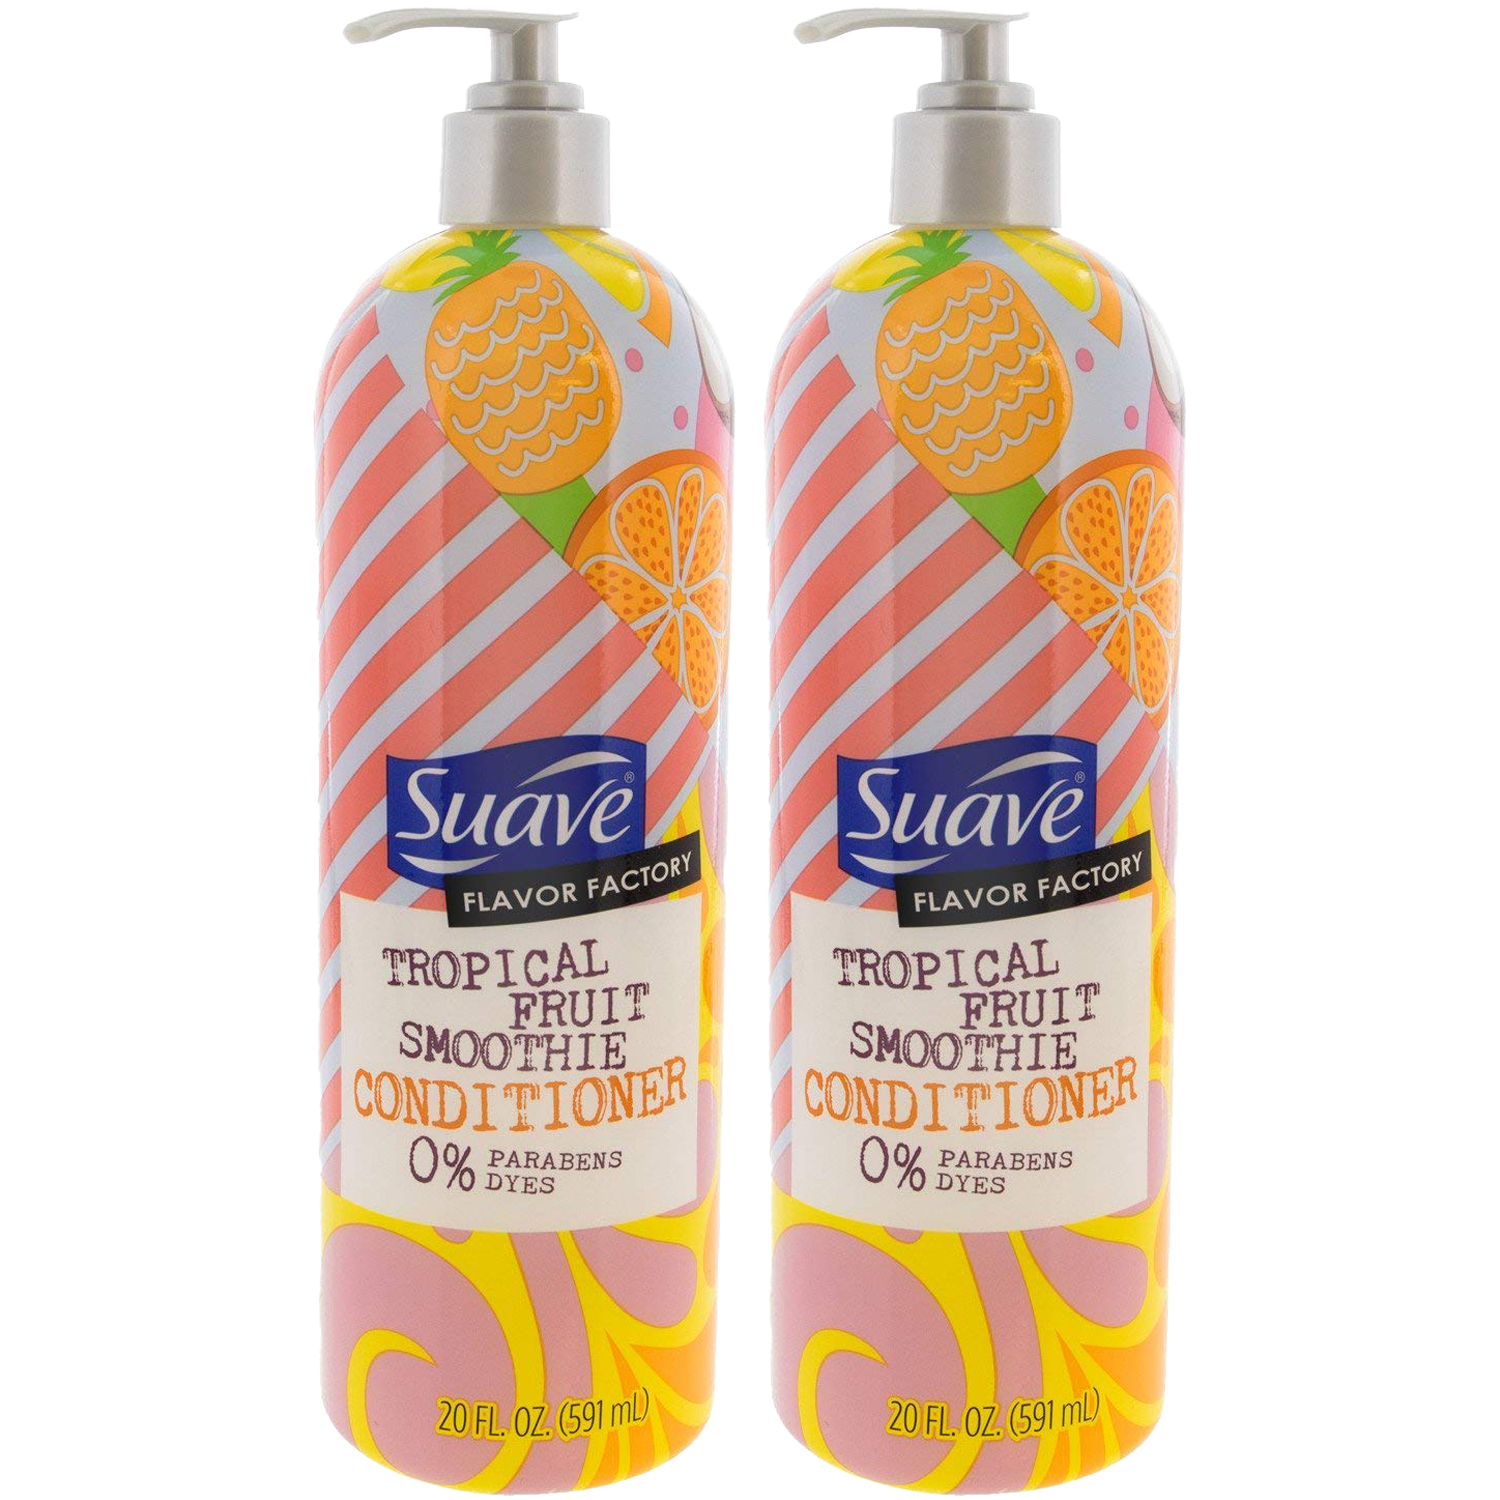 2-Pack New SUAVE HAIR Flavor Factory Tropical Fruit Smoothie Conditioner 20 oz